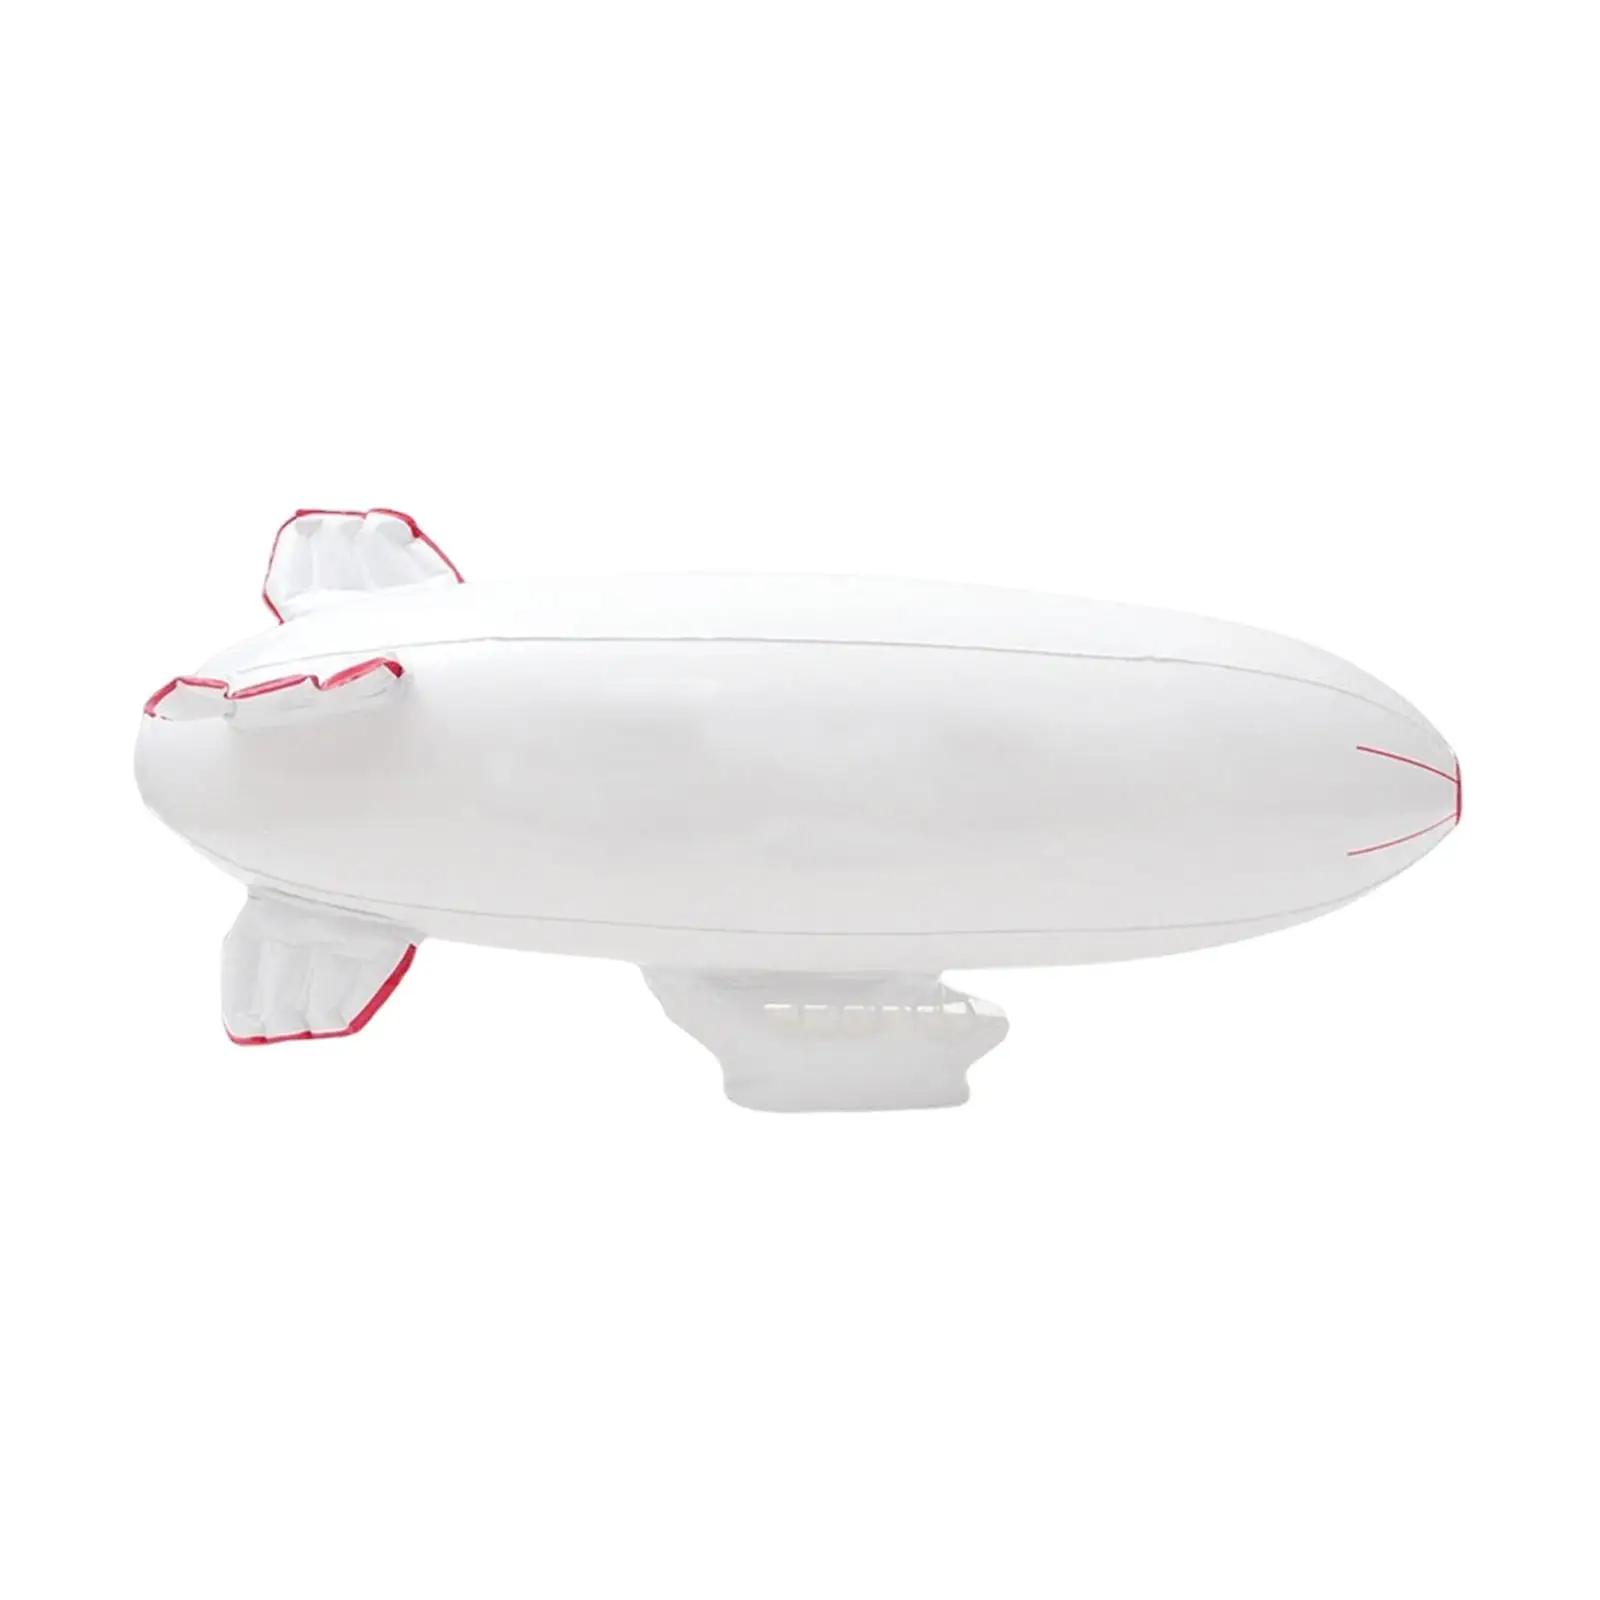 Nflatable Toy Light Weight Airplane Model for Celebration Birthday Party